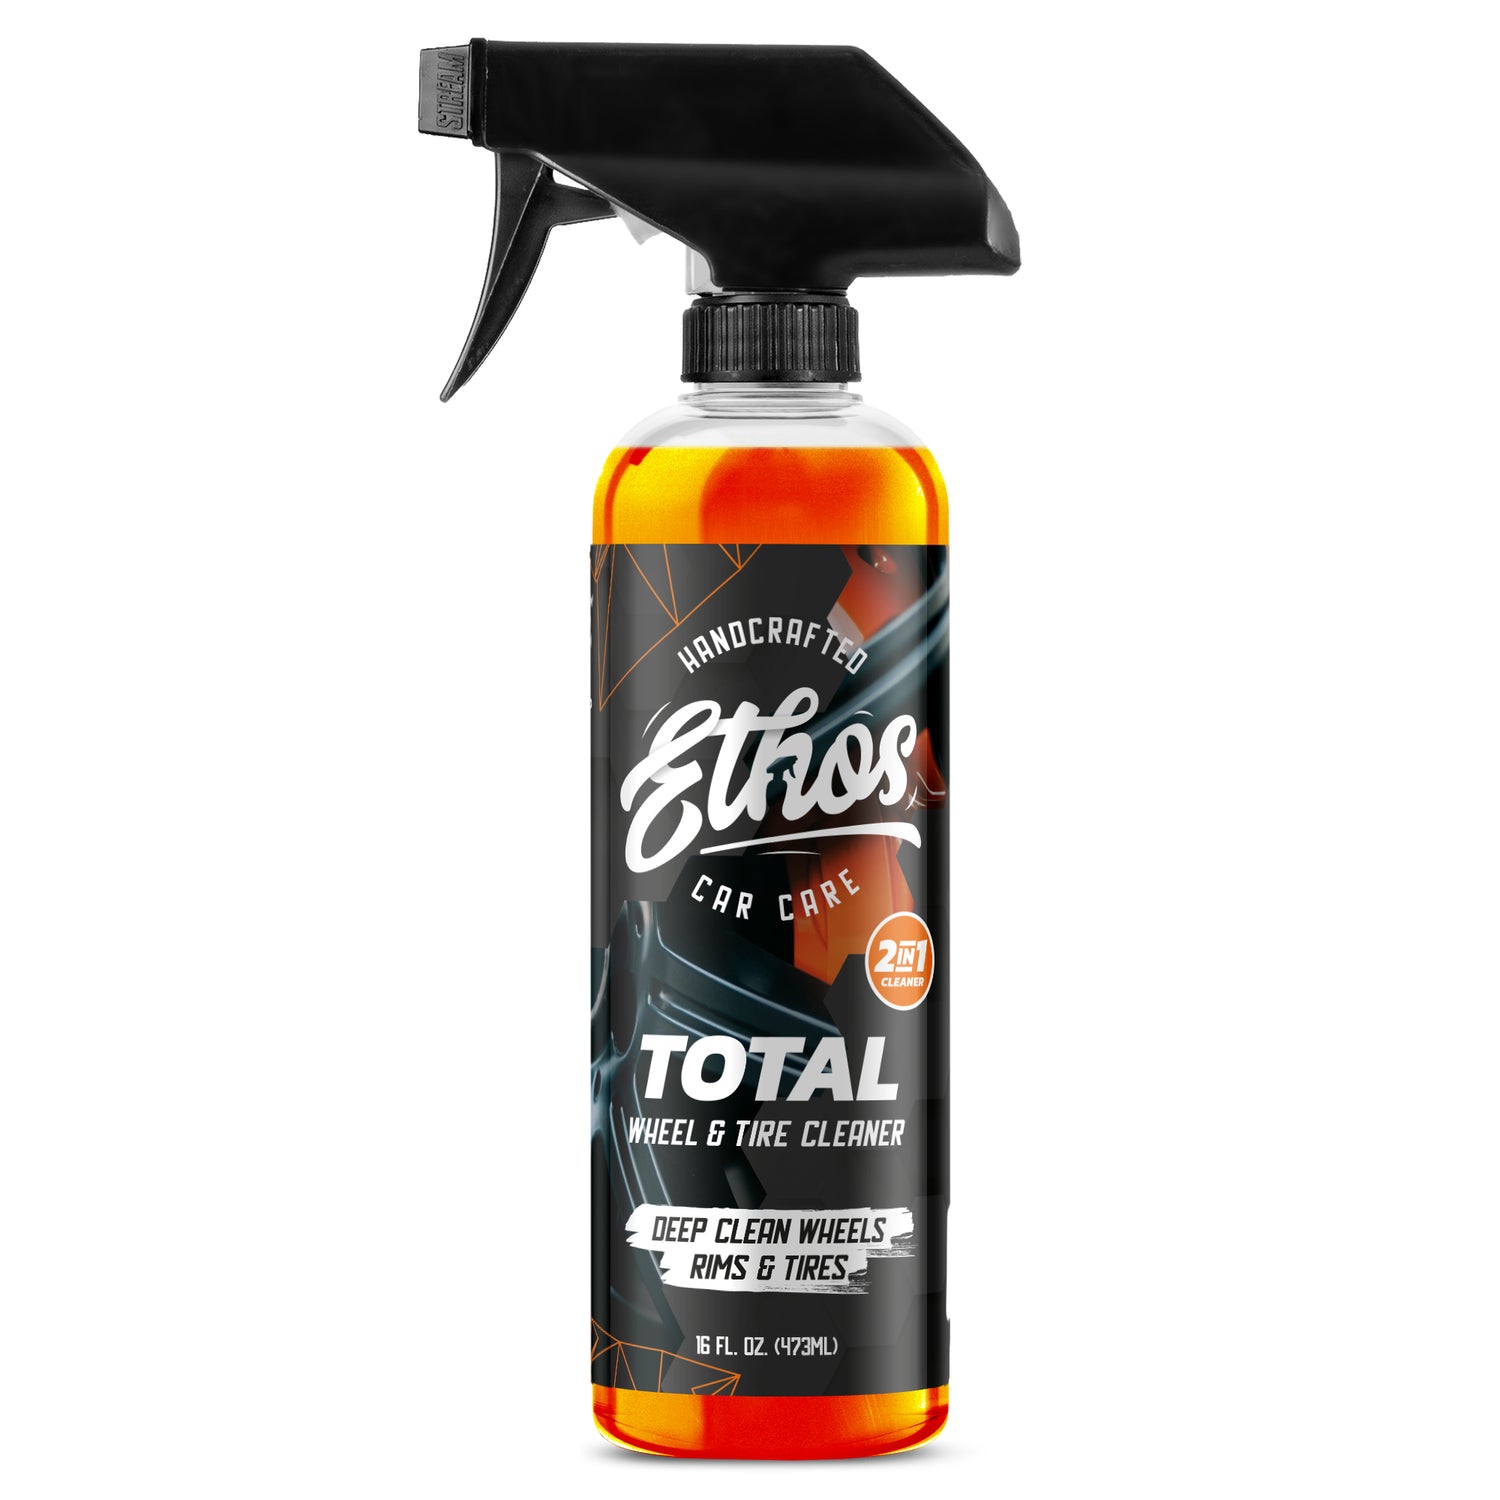 How to Use Ethos Car Care's Total Wheel and Tire Cleaner: A Step-by-Step Guide